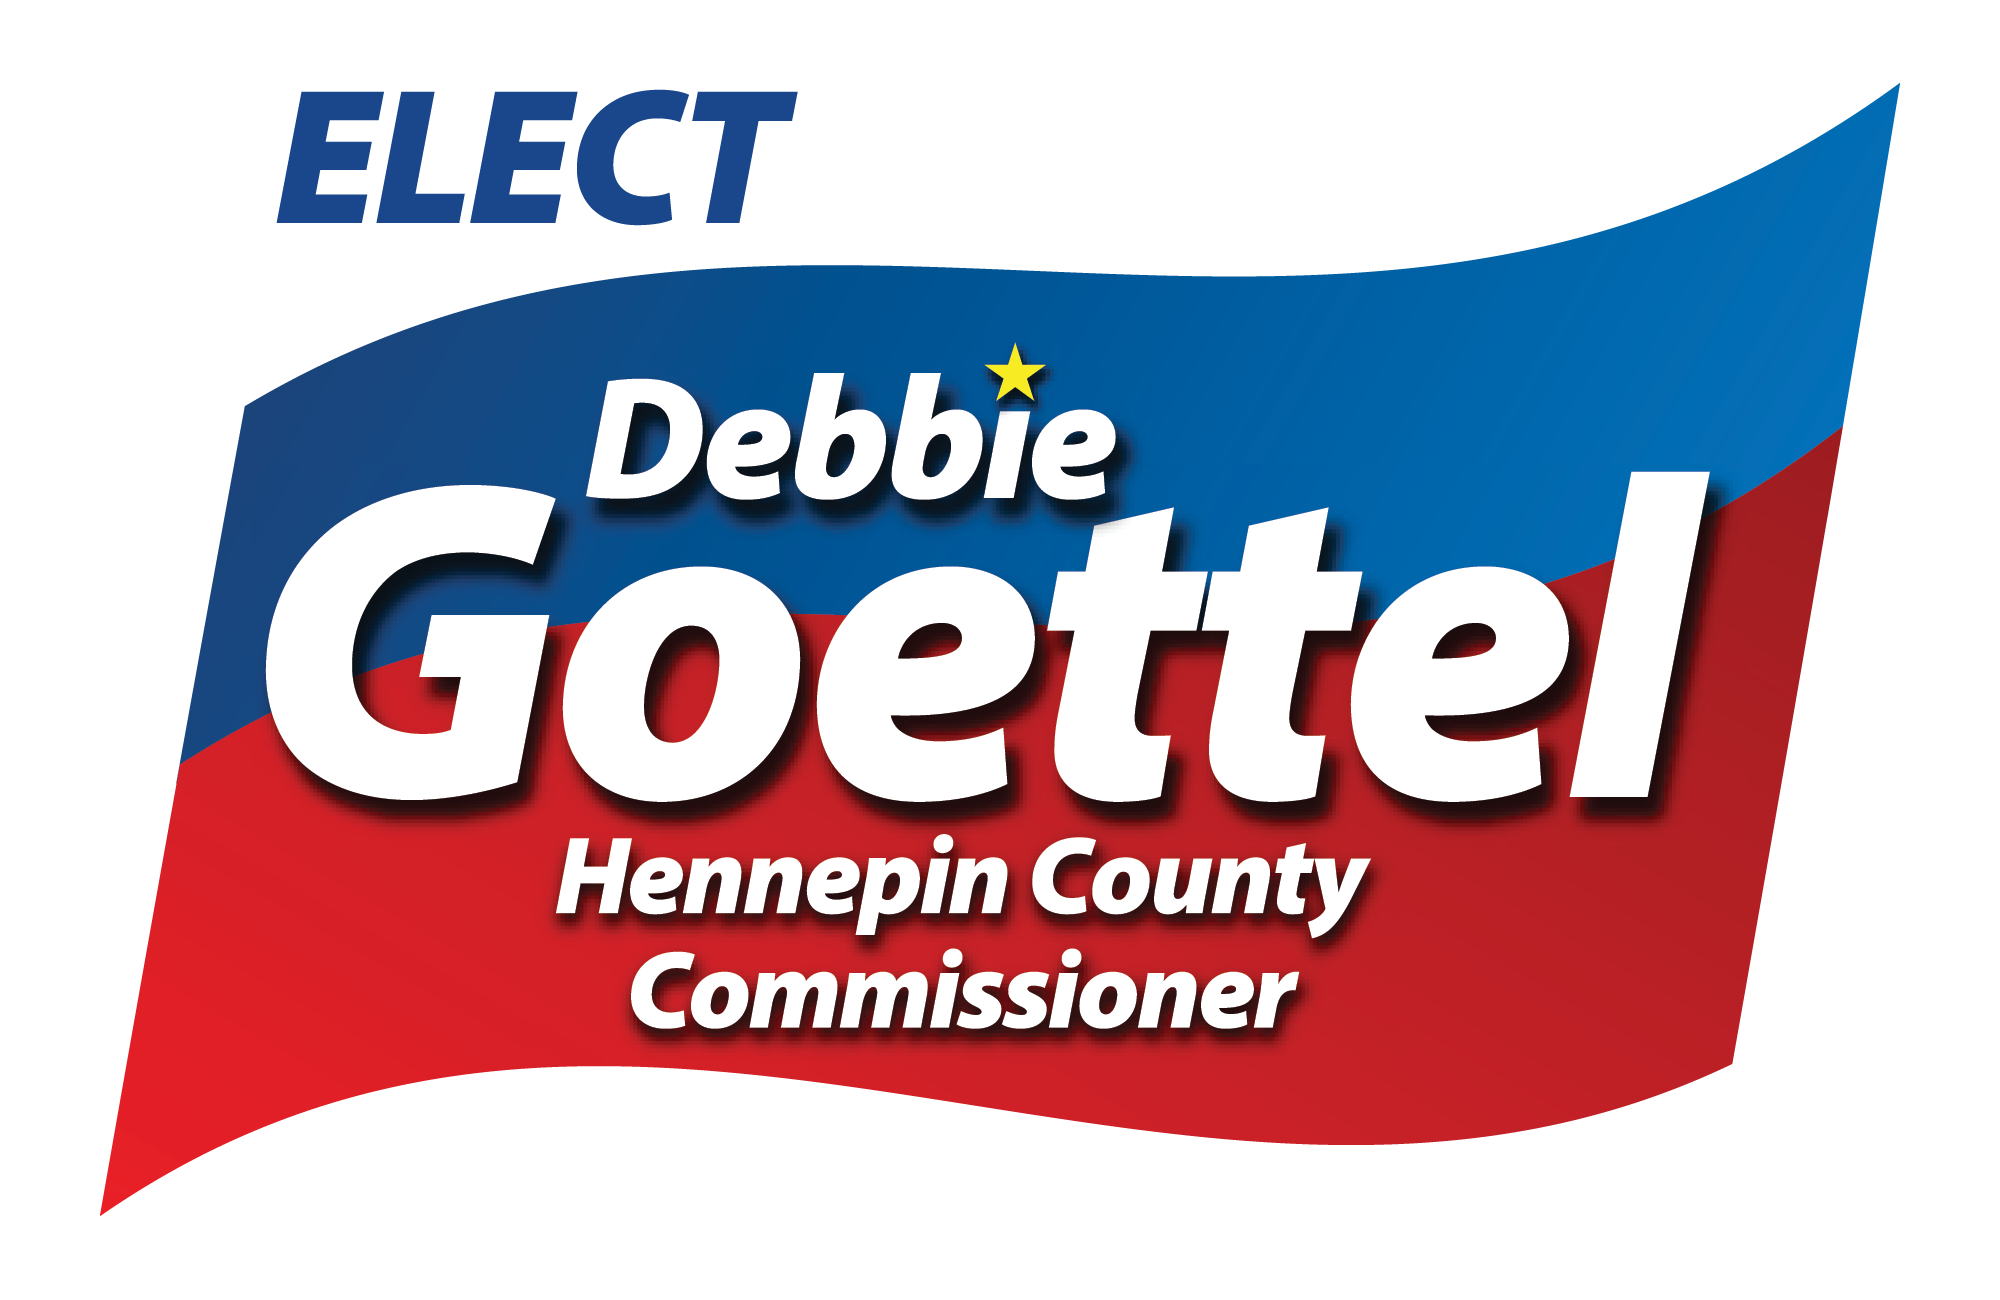 Debbie Goettel for Hennepin County Commissioner logo with elect text